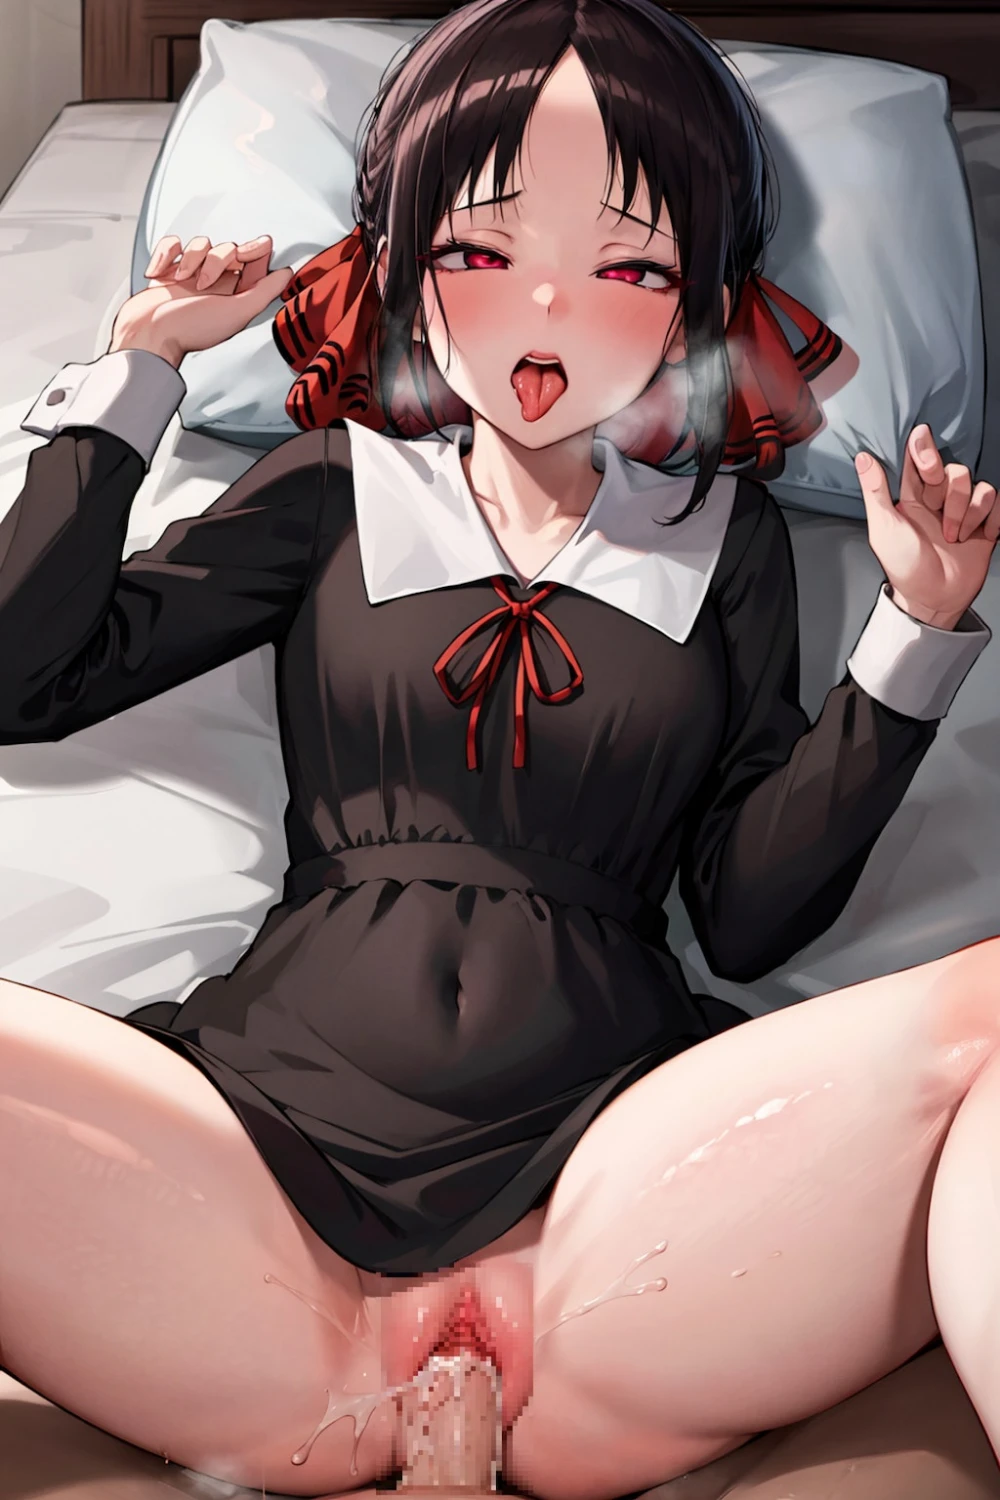 ahegao-anime-style-adults-only-24